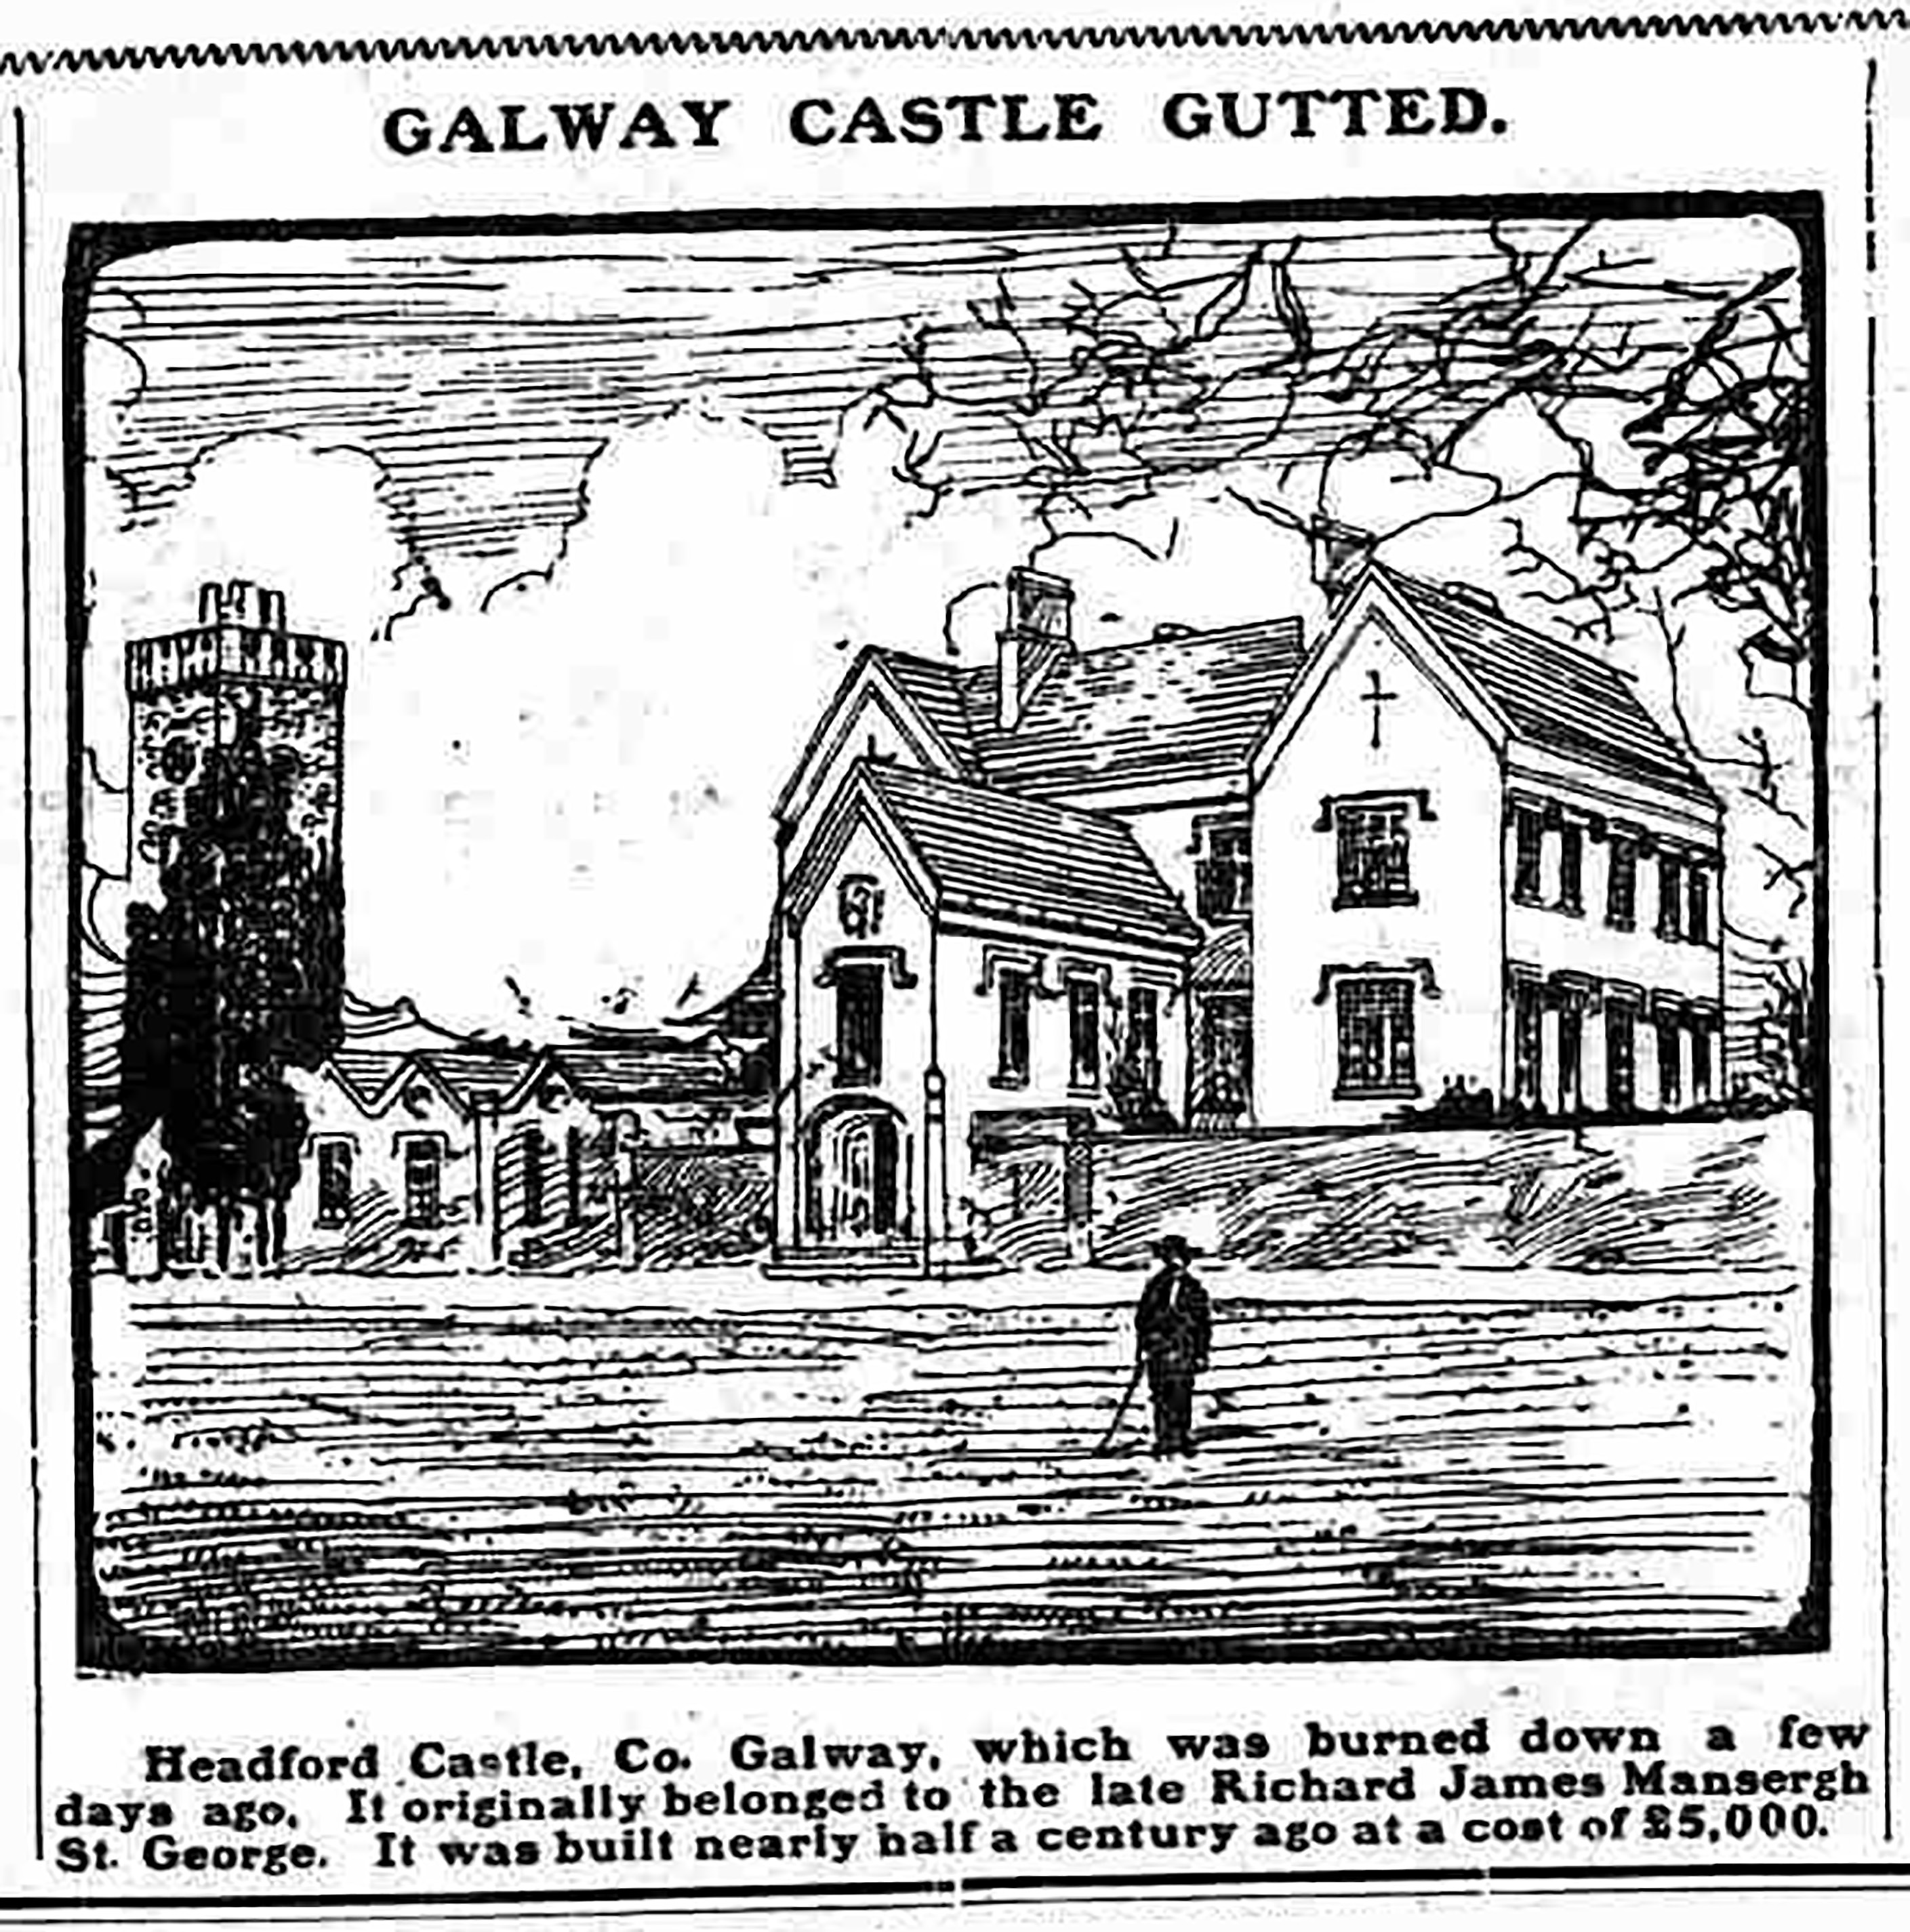 19060629 galway castle gutted